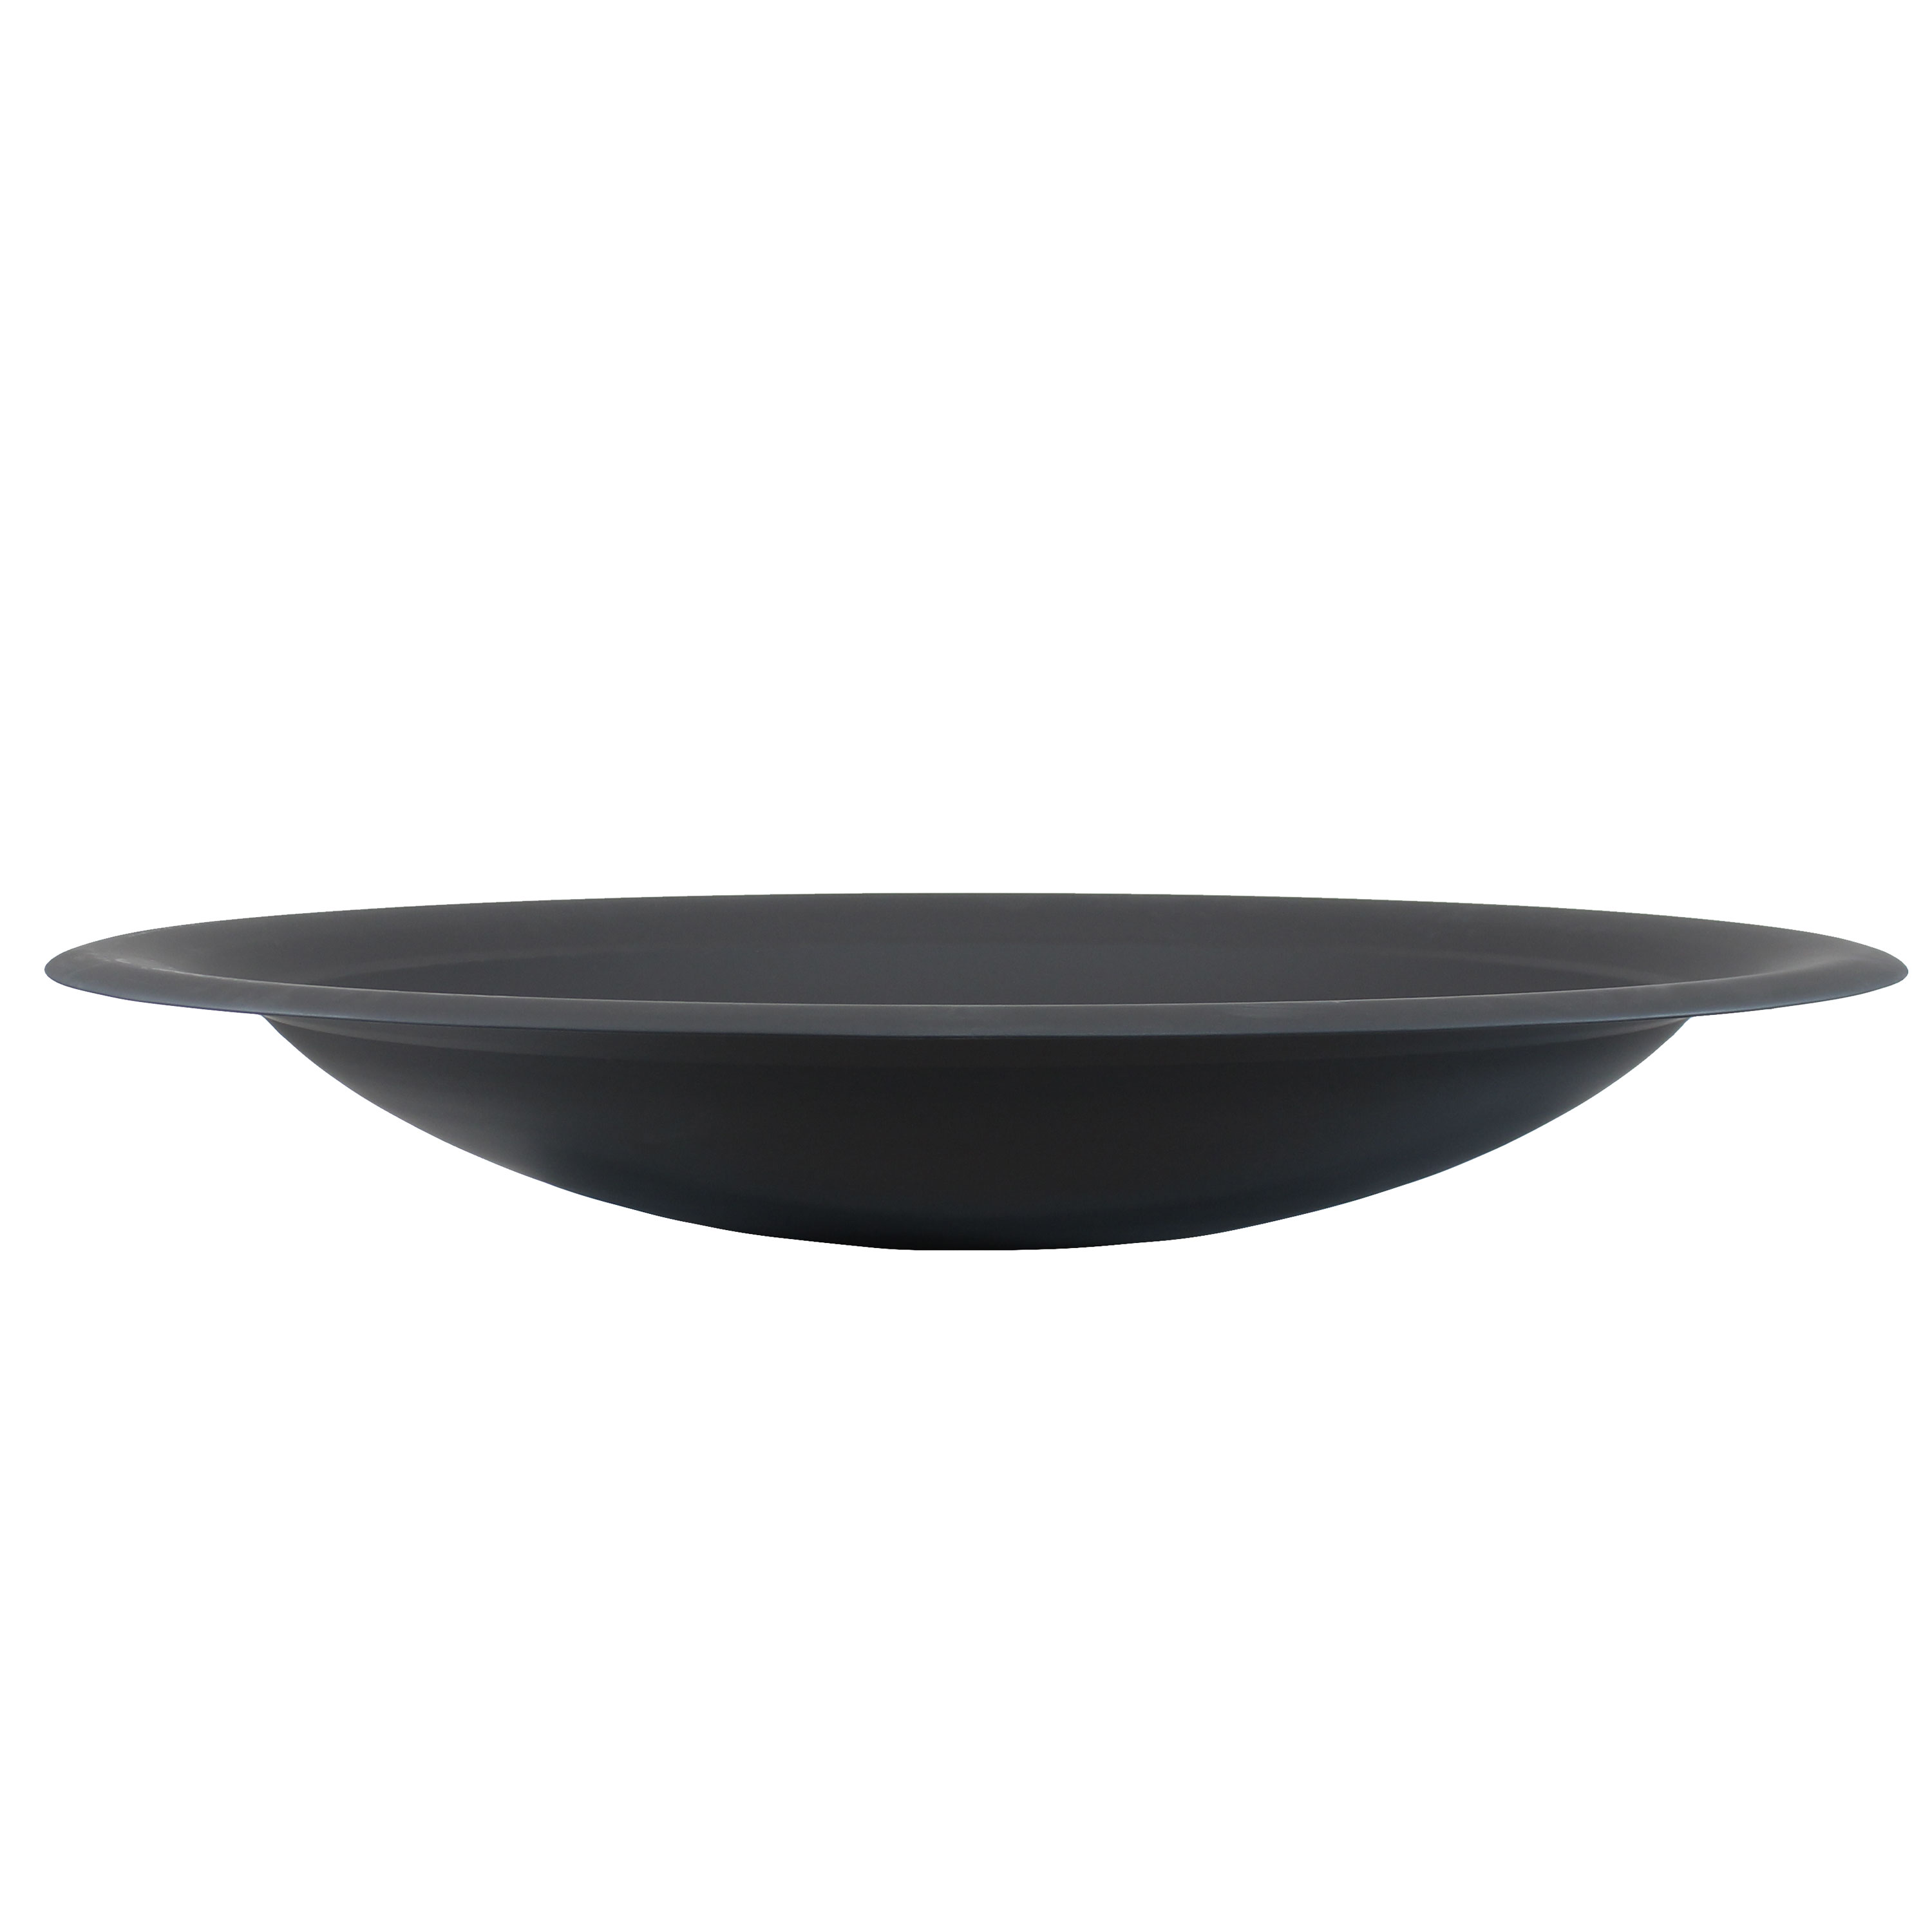 39 in Classic Elegance Replacement Fire Pit Bowl - Black